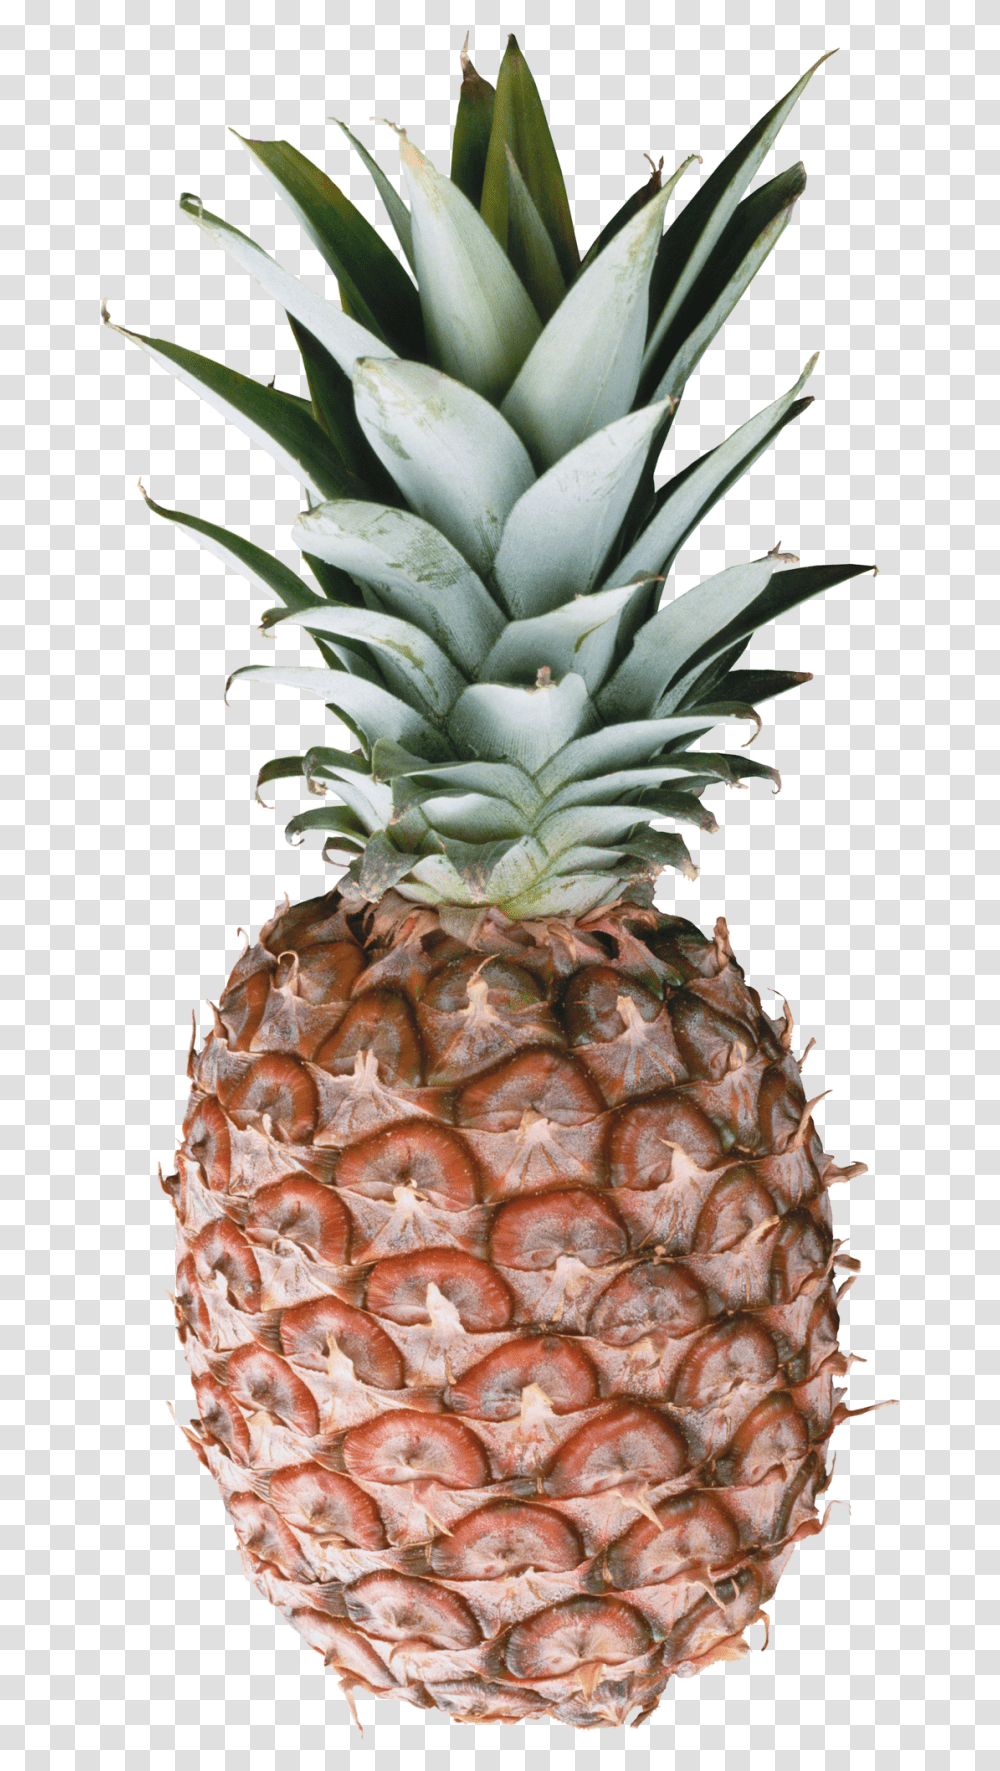 Pineapple Free Pineapple Image Download, Fruit, Plant, Food Transparent Png